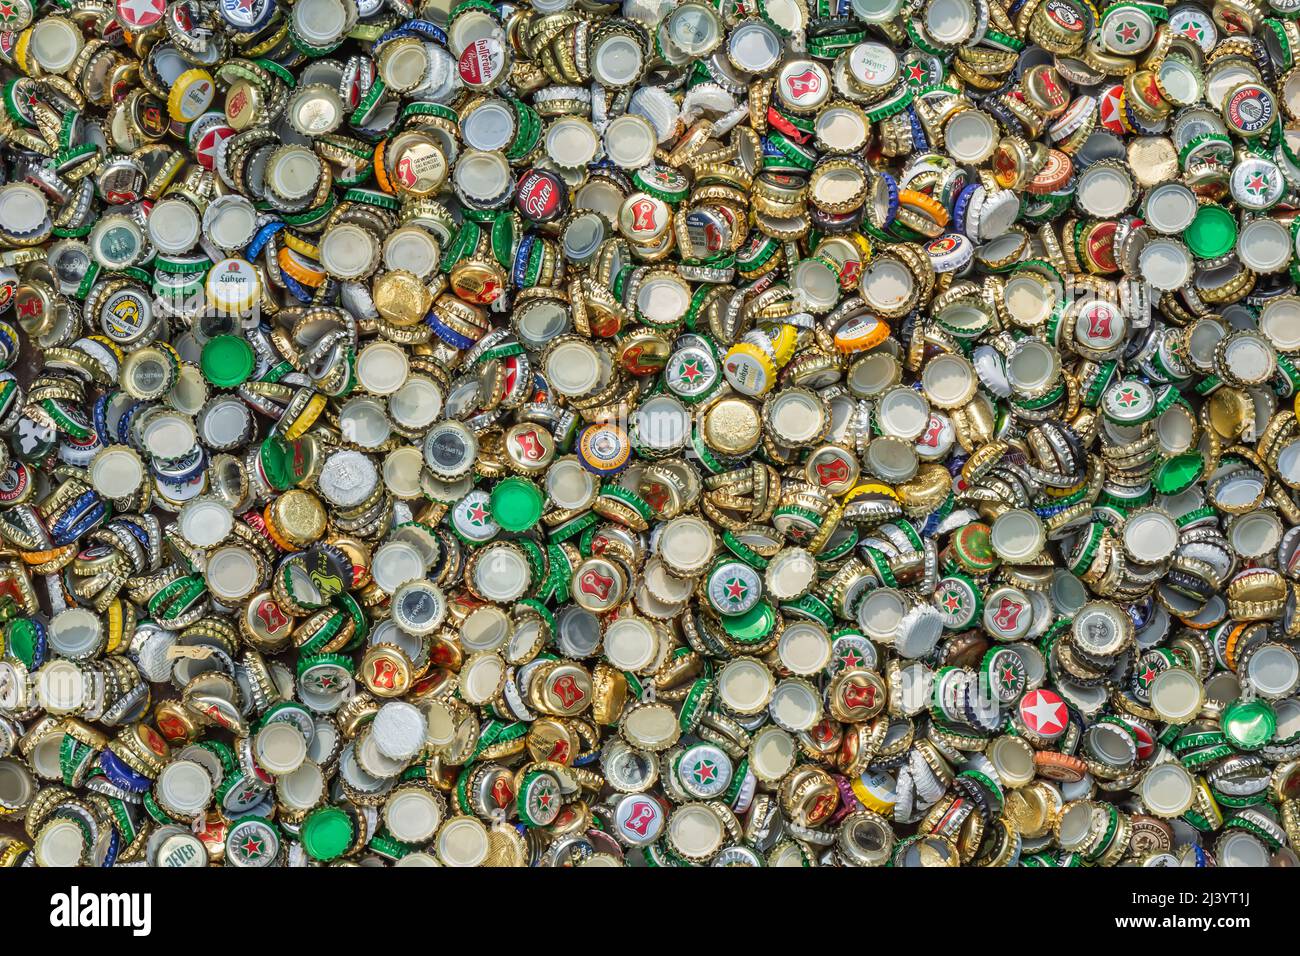 Berlin, Germany, 12.05.2018, enormous quantity of metal beer caps in golden, red, green, blue, white, silver etc. Recycling, environment, ecology Stock Photo